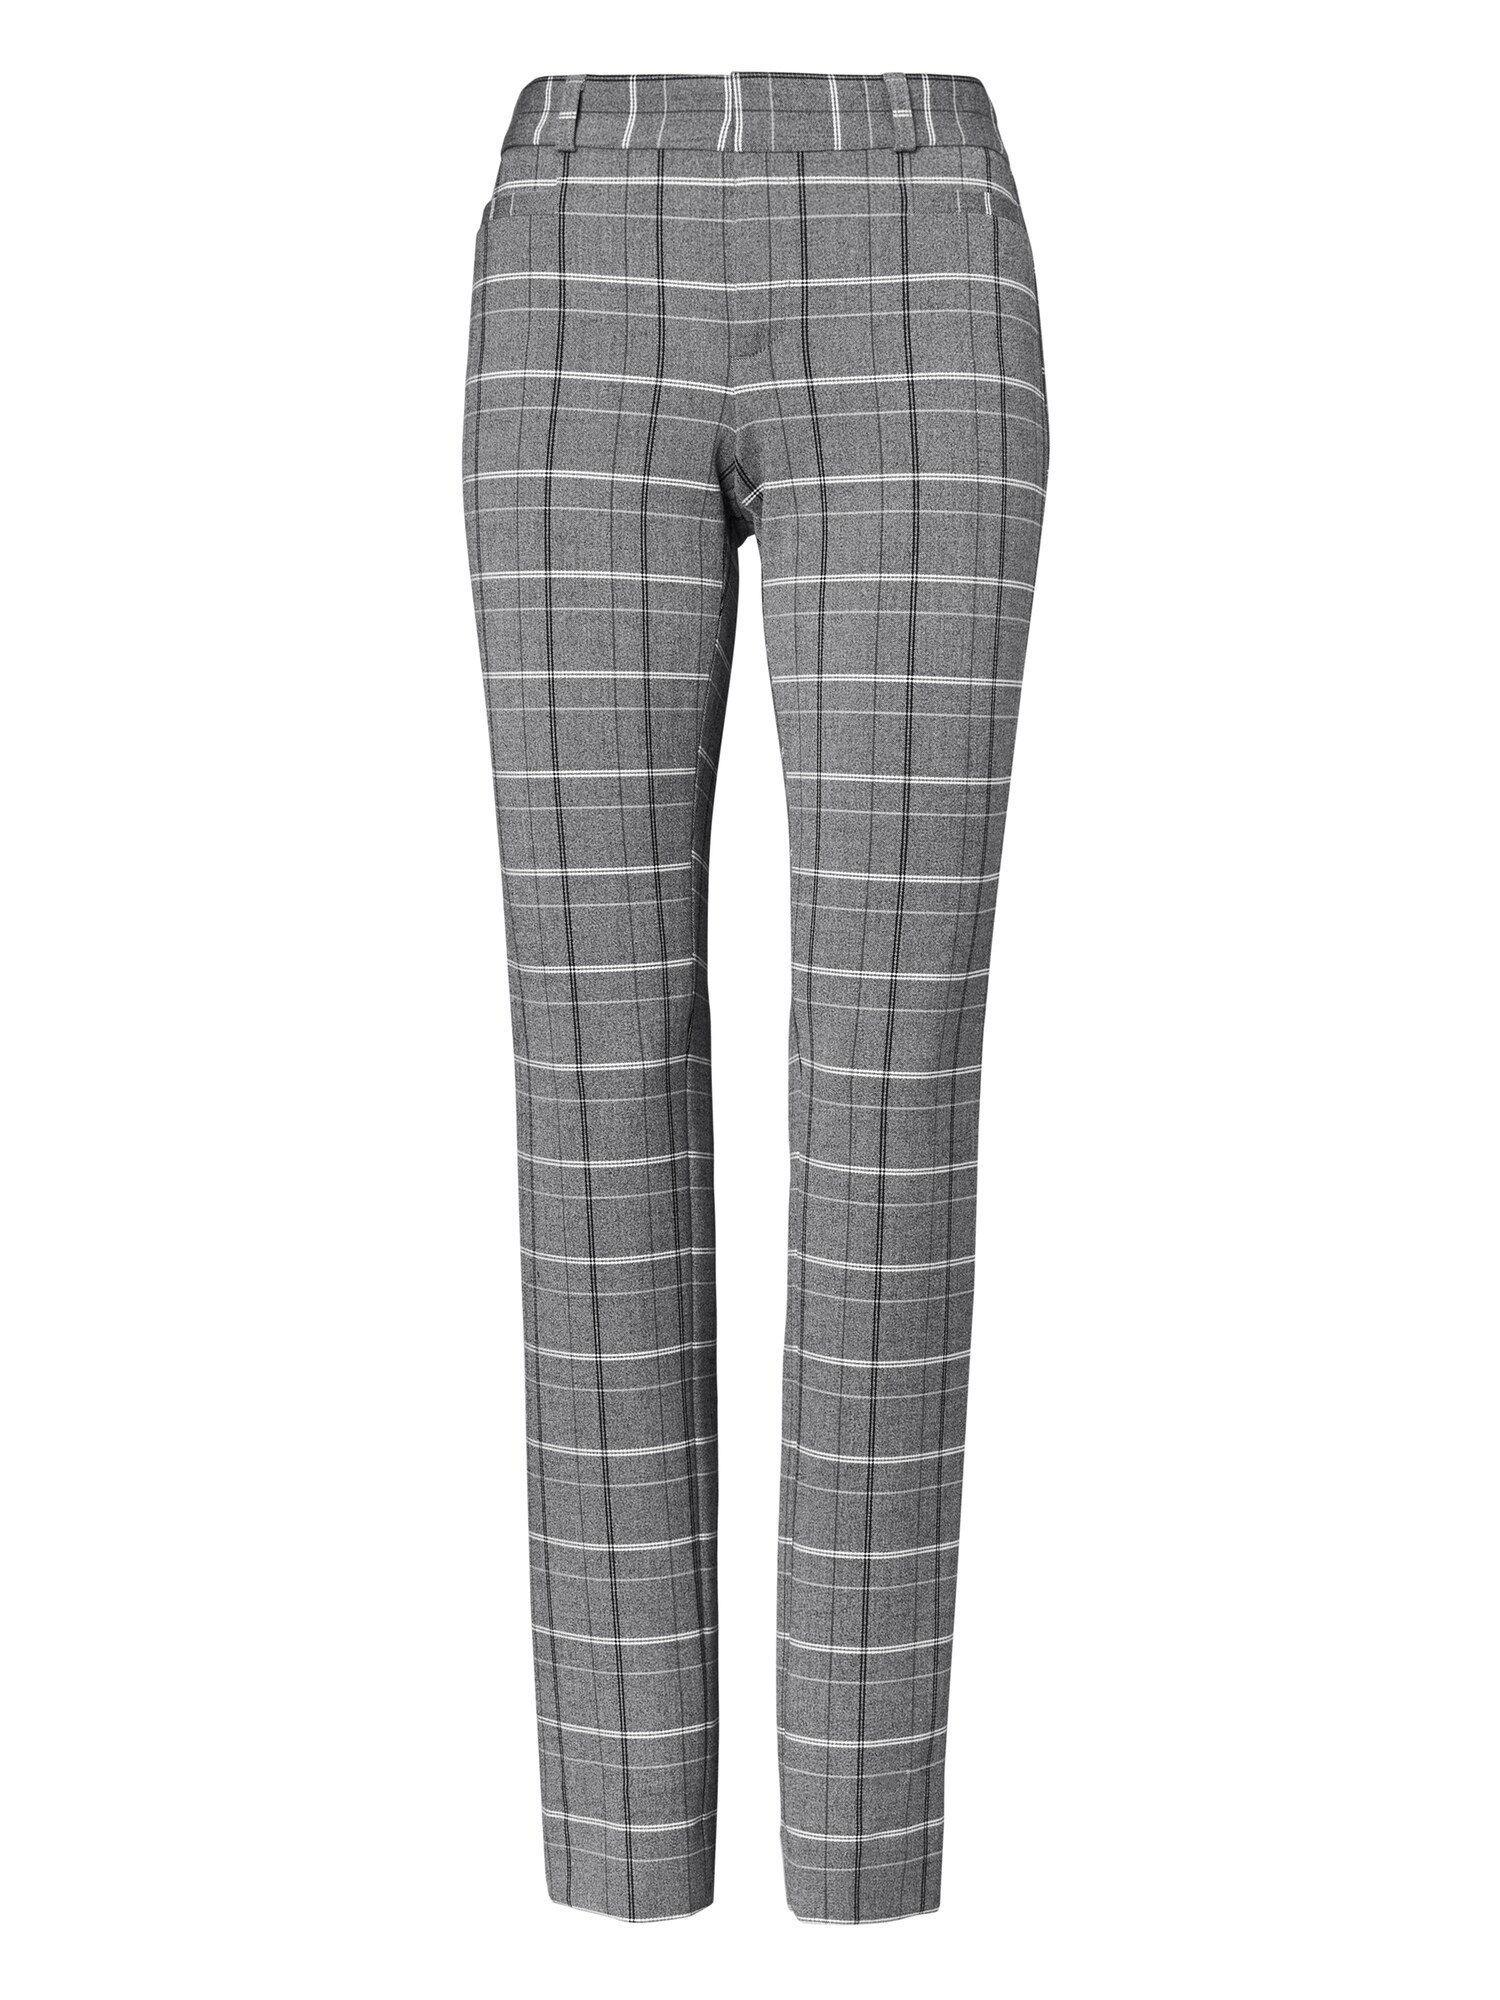 Sloan Skinny-Fit Plaid Ankle Pant